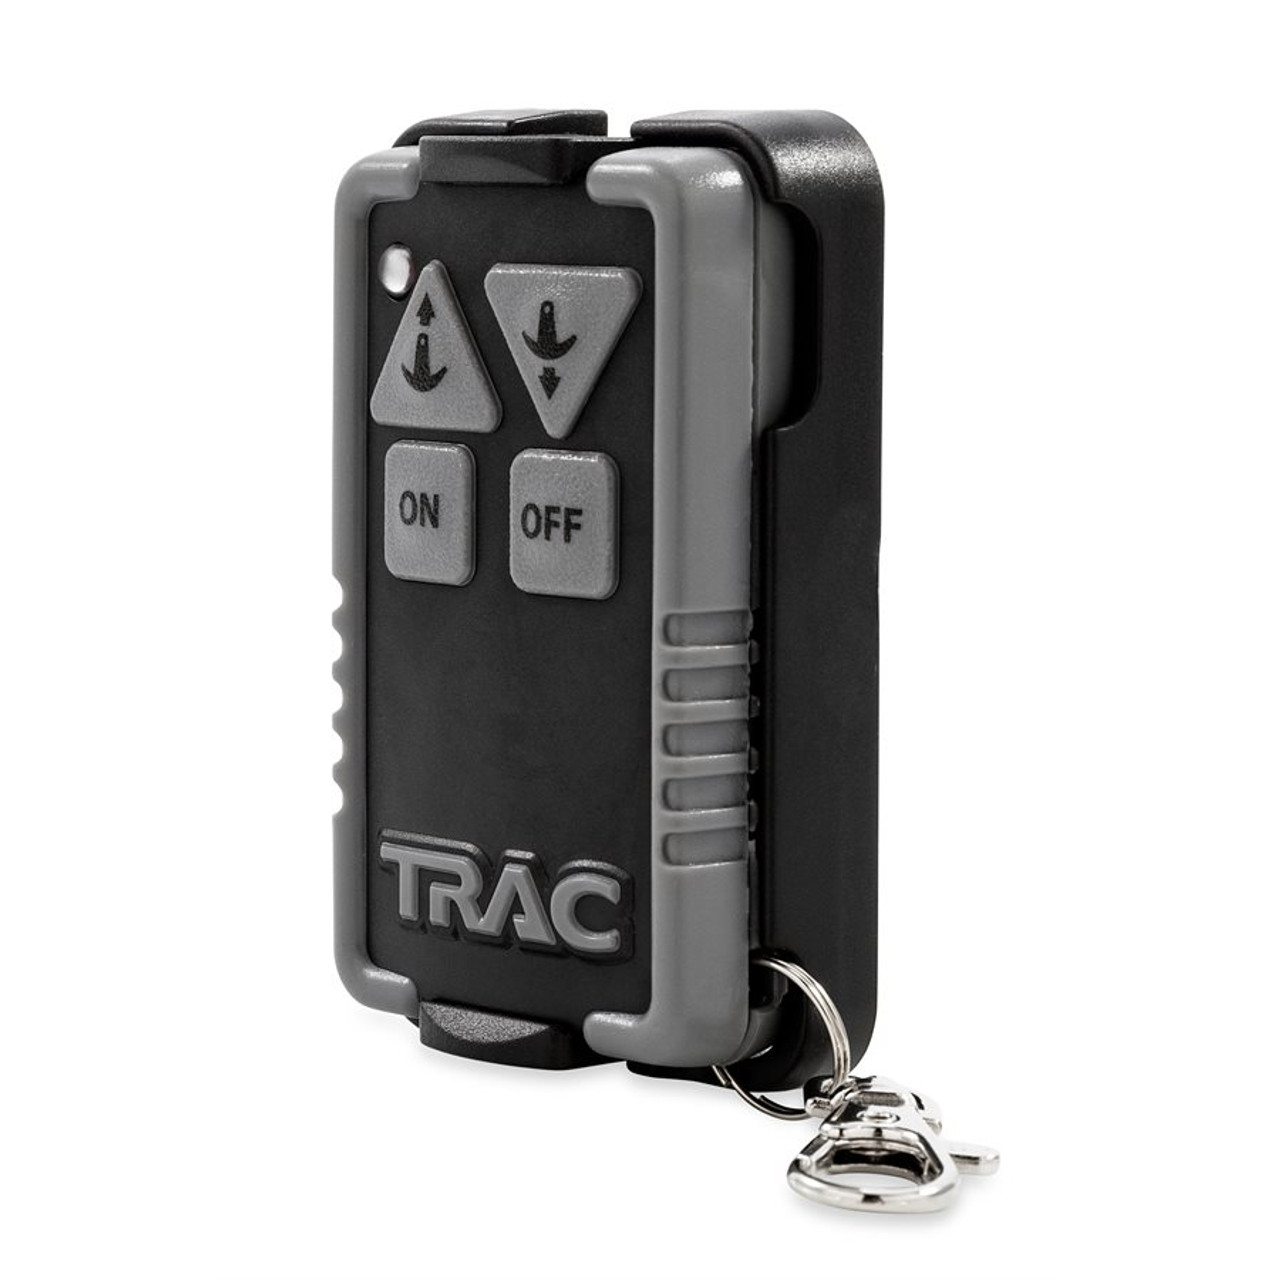 Trac by Camco G3 Wireless Remote for Anchor Winches - Wolf's Marine